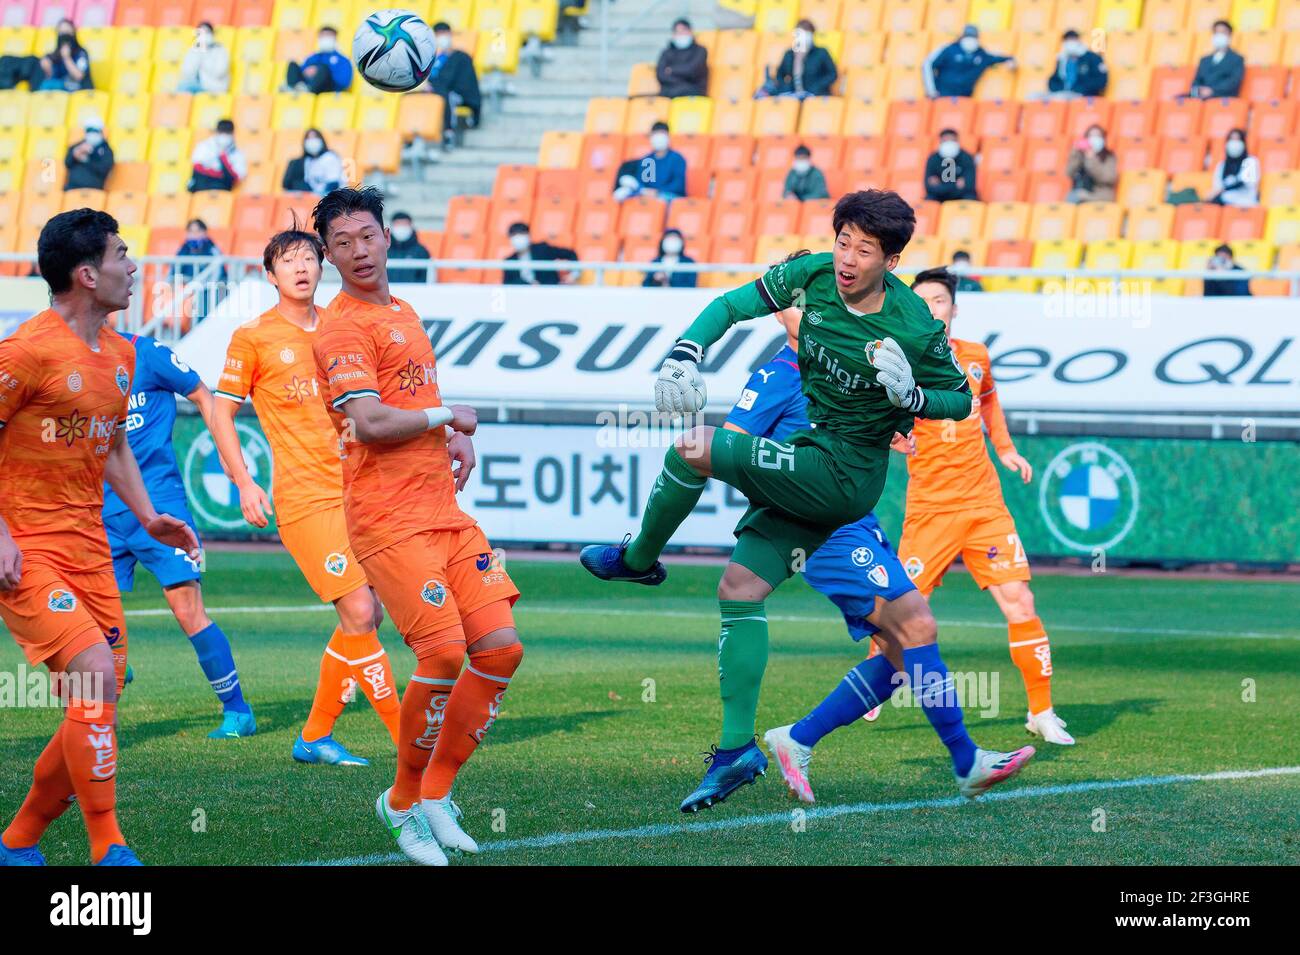 Seoul, South Korea. 14th Mar, 2021. Lee Bum-Soo (front R, Gangwon FC), Mar 14, 2021 - Football/Soccer : Gangwon FC goalkeeper Lee Bum-Soo punches the ball during the 4th round of the 2021 K League 1 soccer match between Suwon Samsung Bluewings FC 1:1 Gangwon FC at the Suwon World Cup Stadium in Suwon, south of Seoul, South Korea. Credit: Lee Jae-Won/AFLO/Alamy Live News Stock Photo